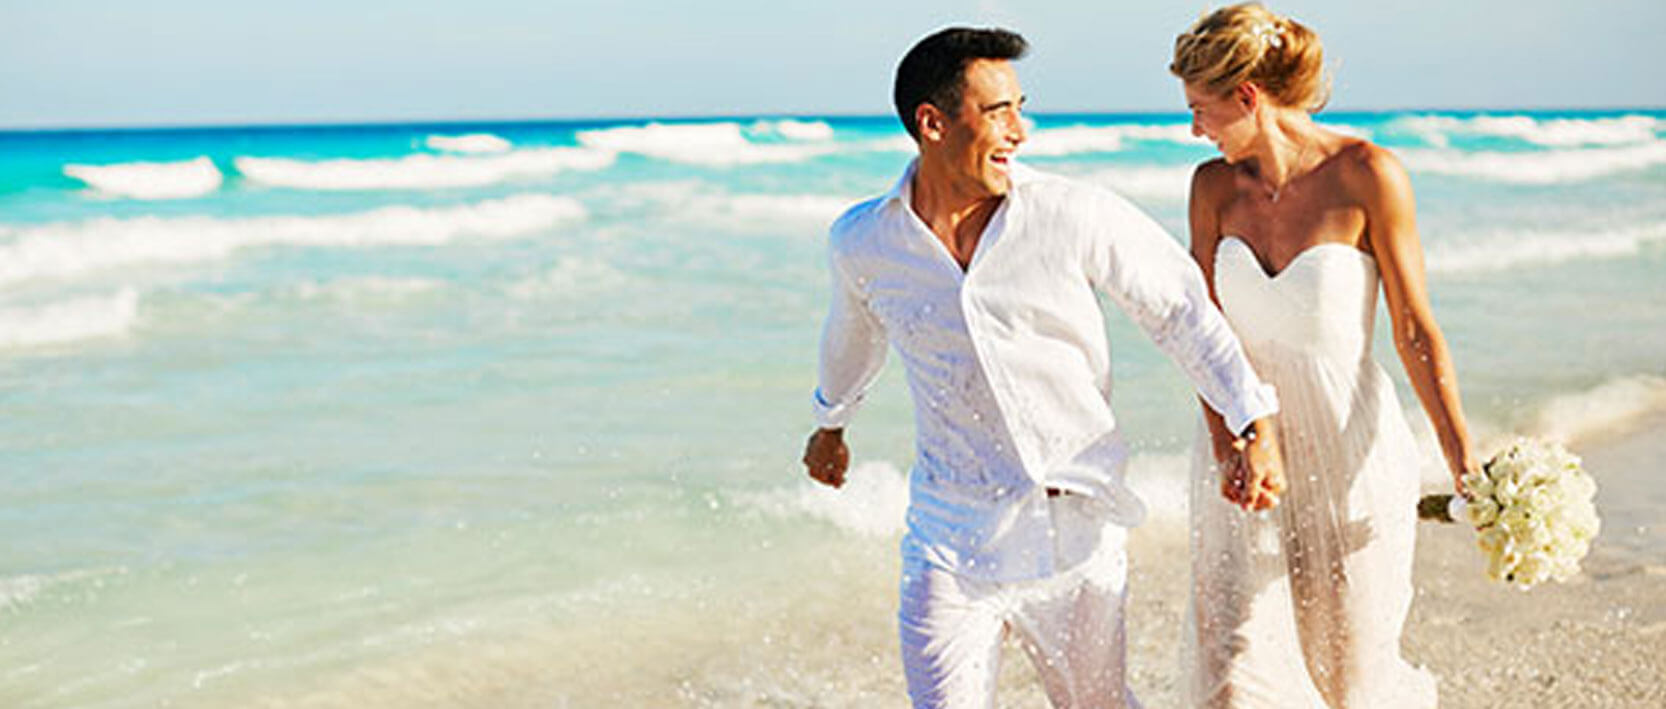 Playa del Carmen Spa - For Just the Two of You Wedding Package